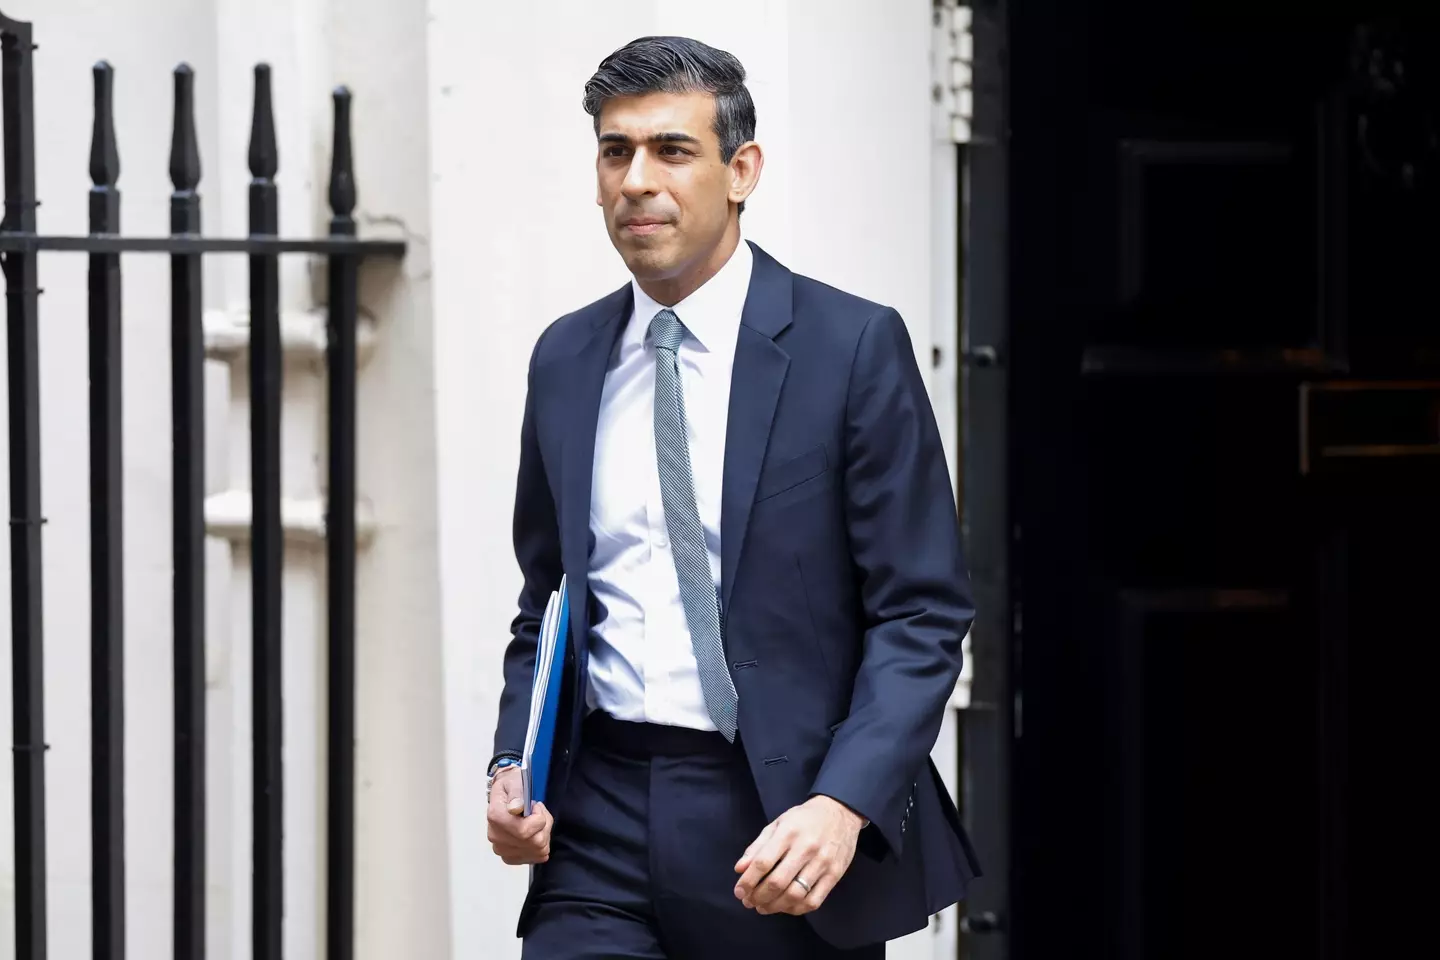 Rishi Sunak is the third prime minister the UK has had in 2022, he'll be hoping there isn't a fourth.